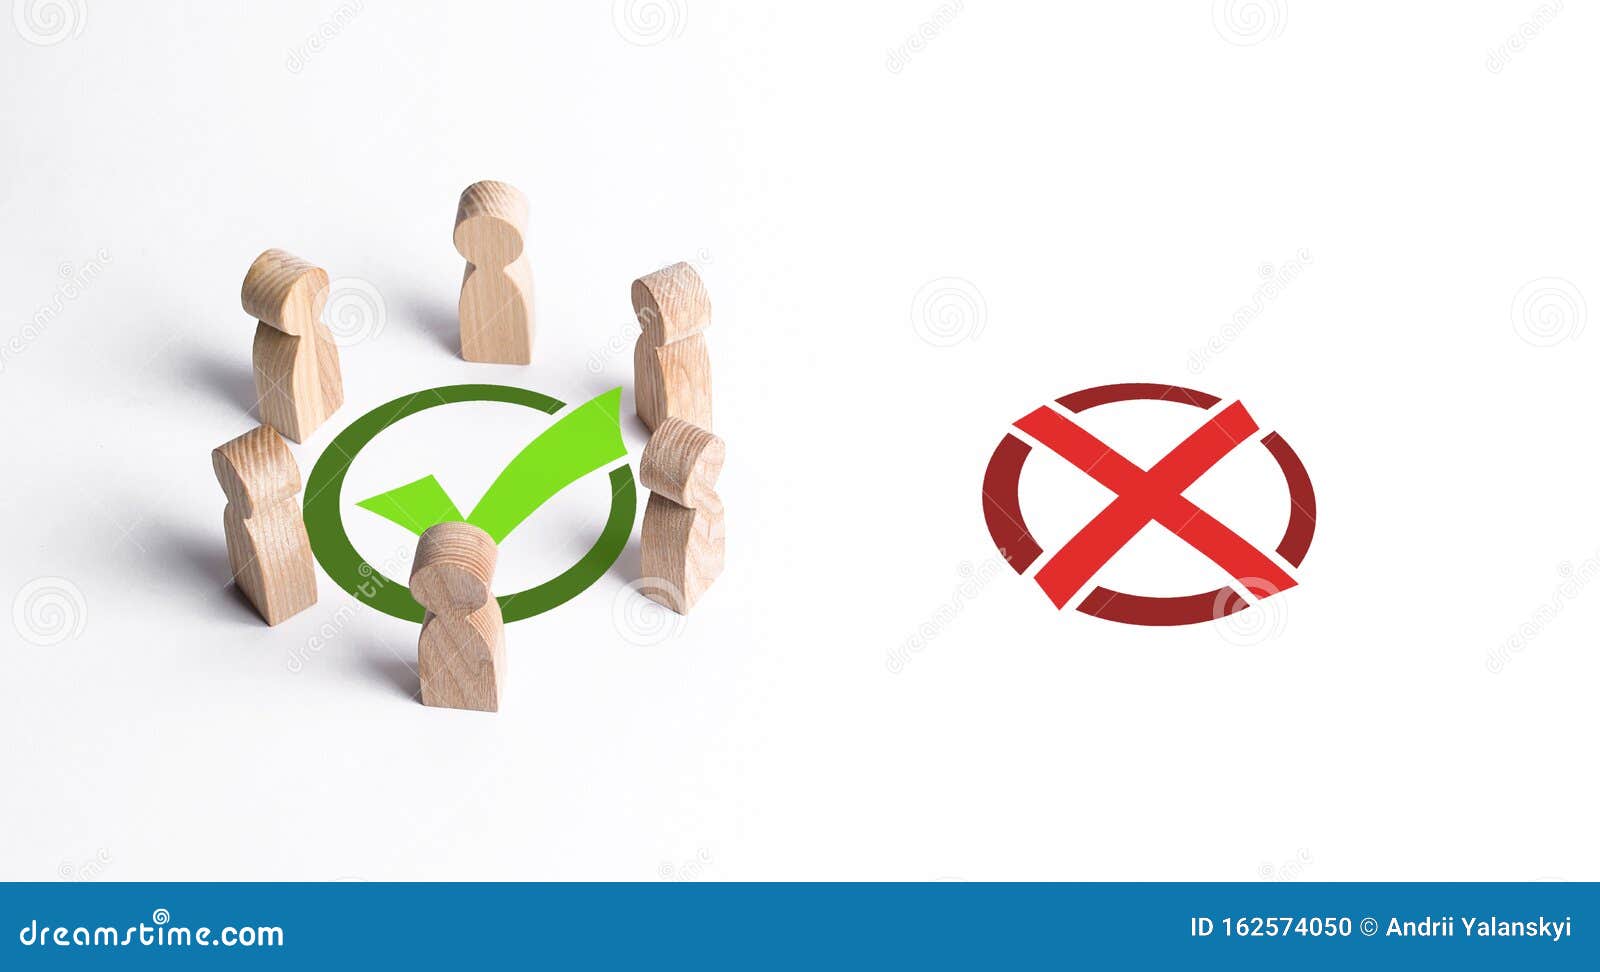 a group of people surrounded a green checkmark, ignoring the red x. the right collective choice, smart strategy and foresight